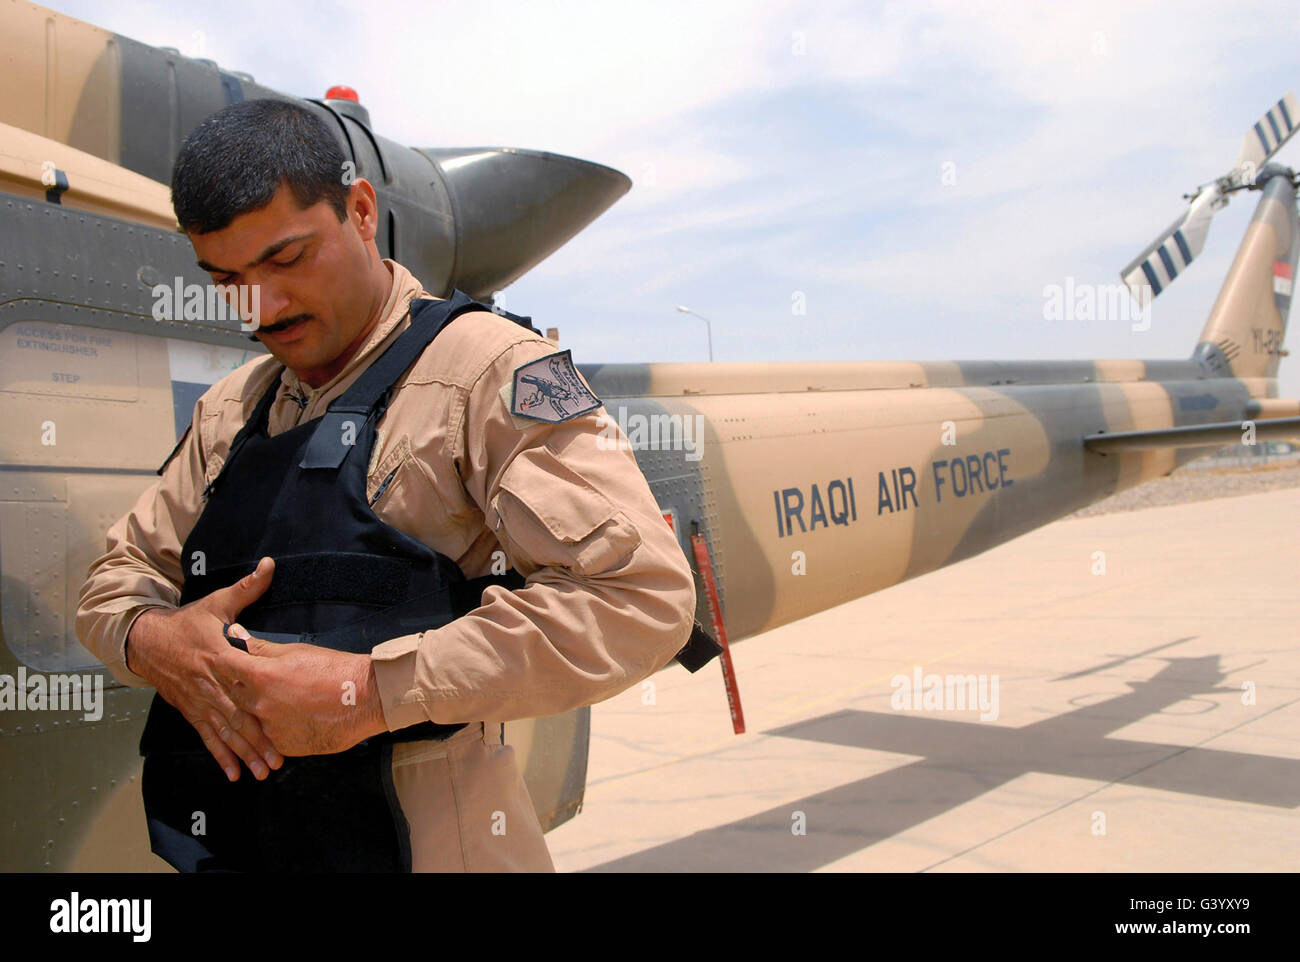 An Iraqi air force aerial gunner putting on his body armor. Stock Photo